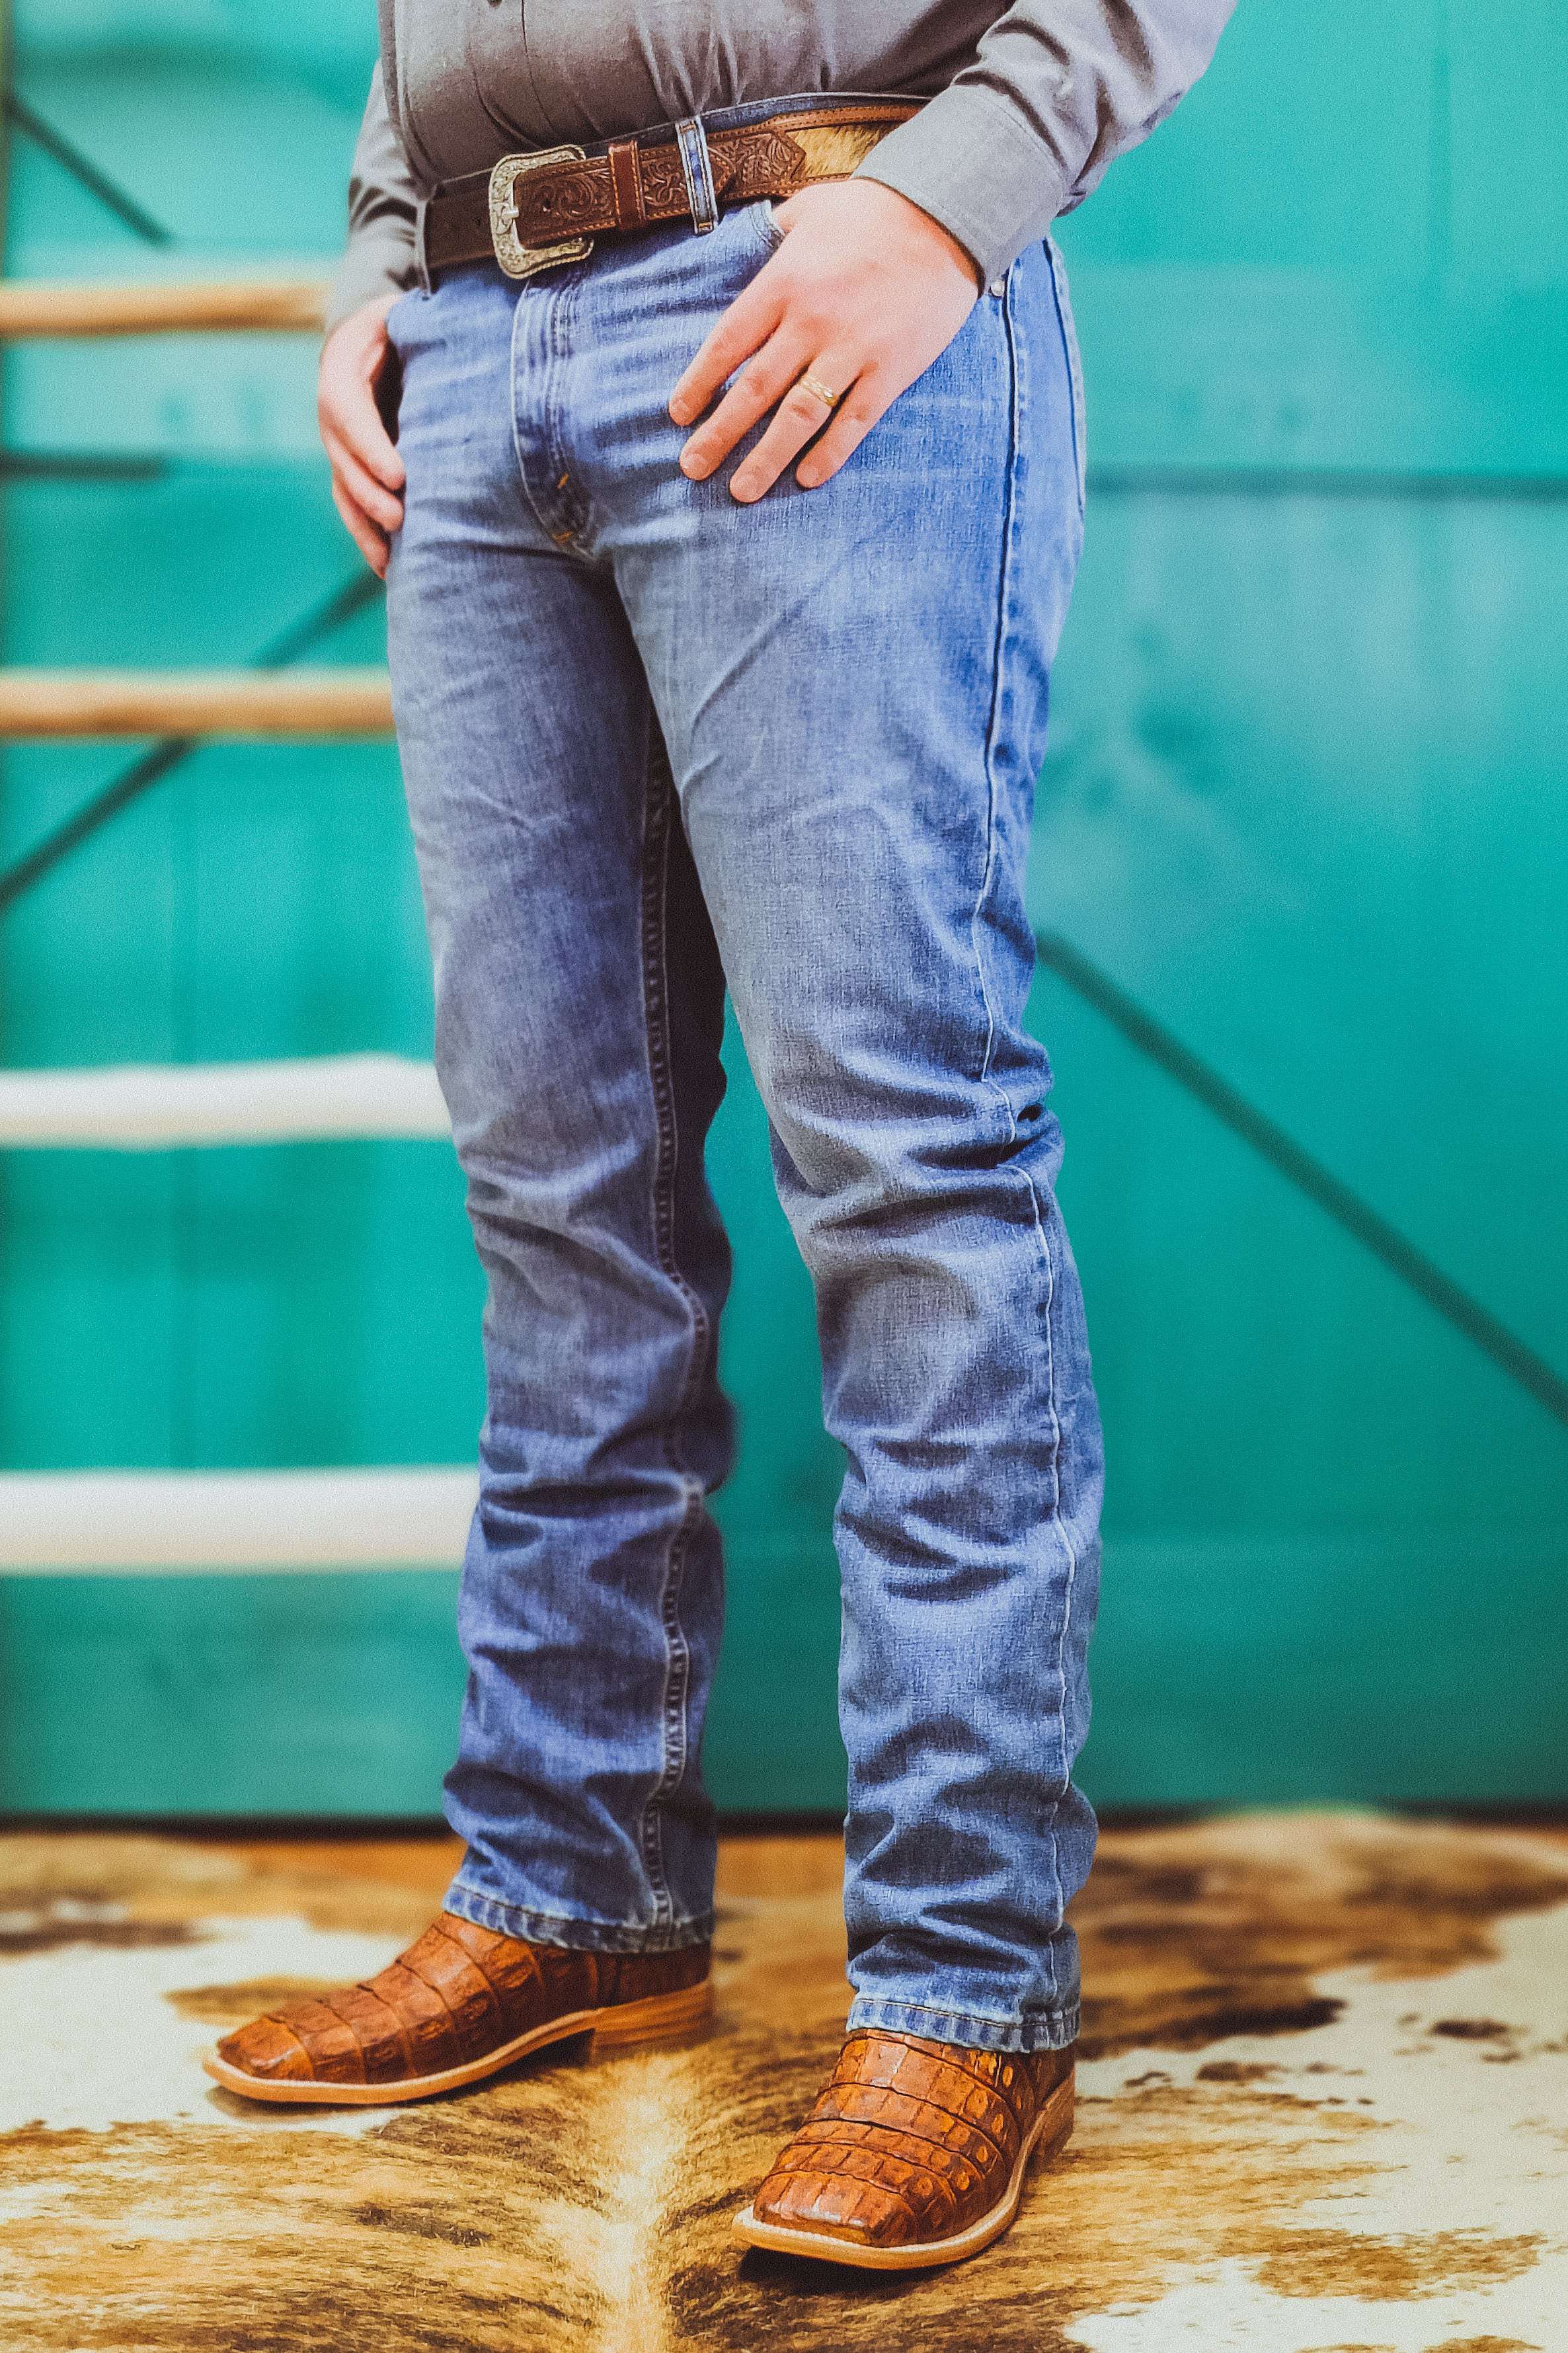 Payson Jeans by Wrangler - The Glamorous Cowgirl